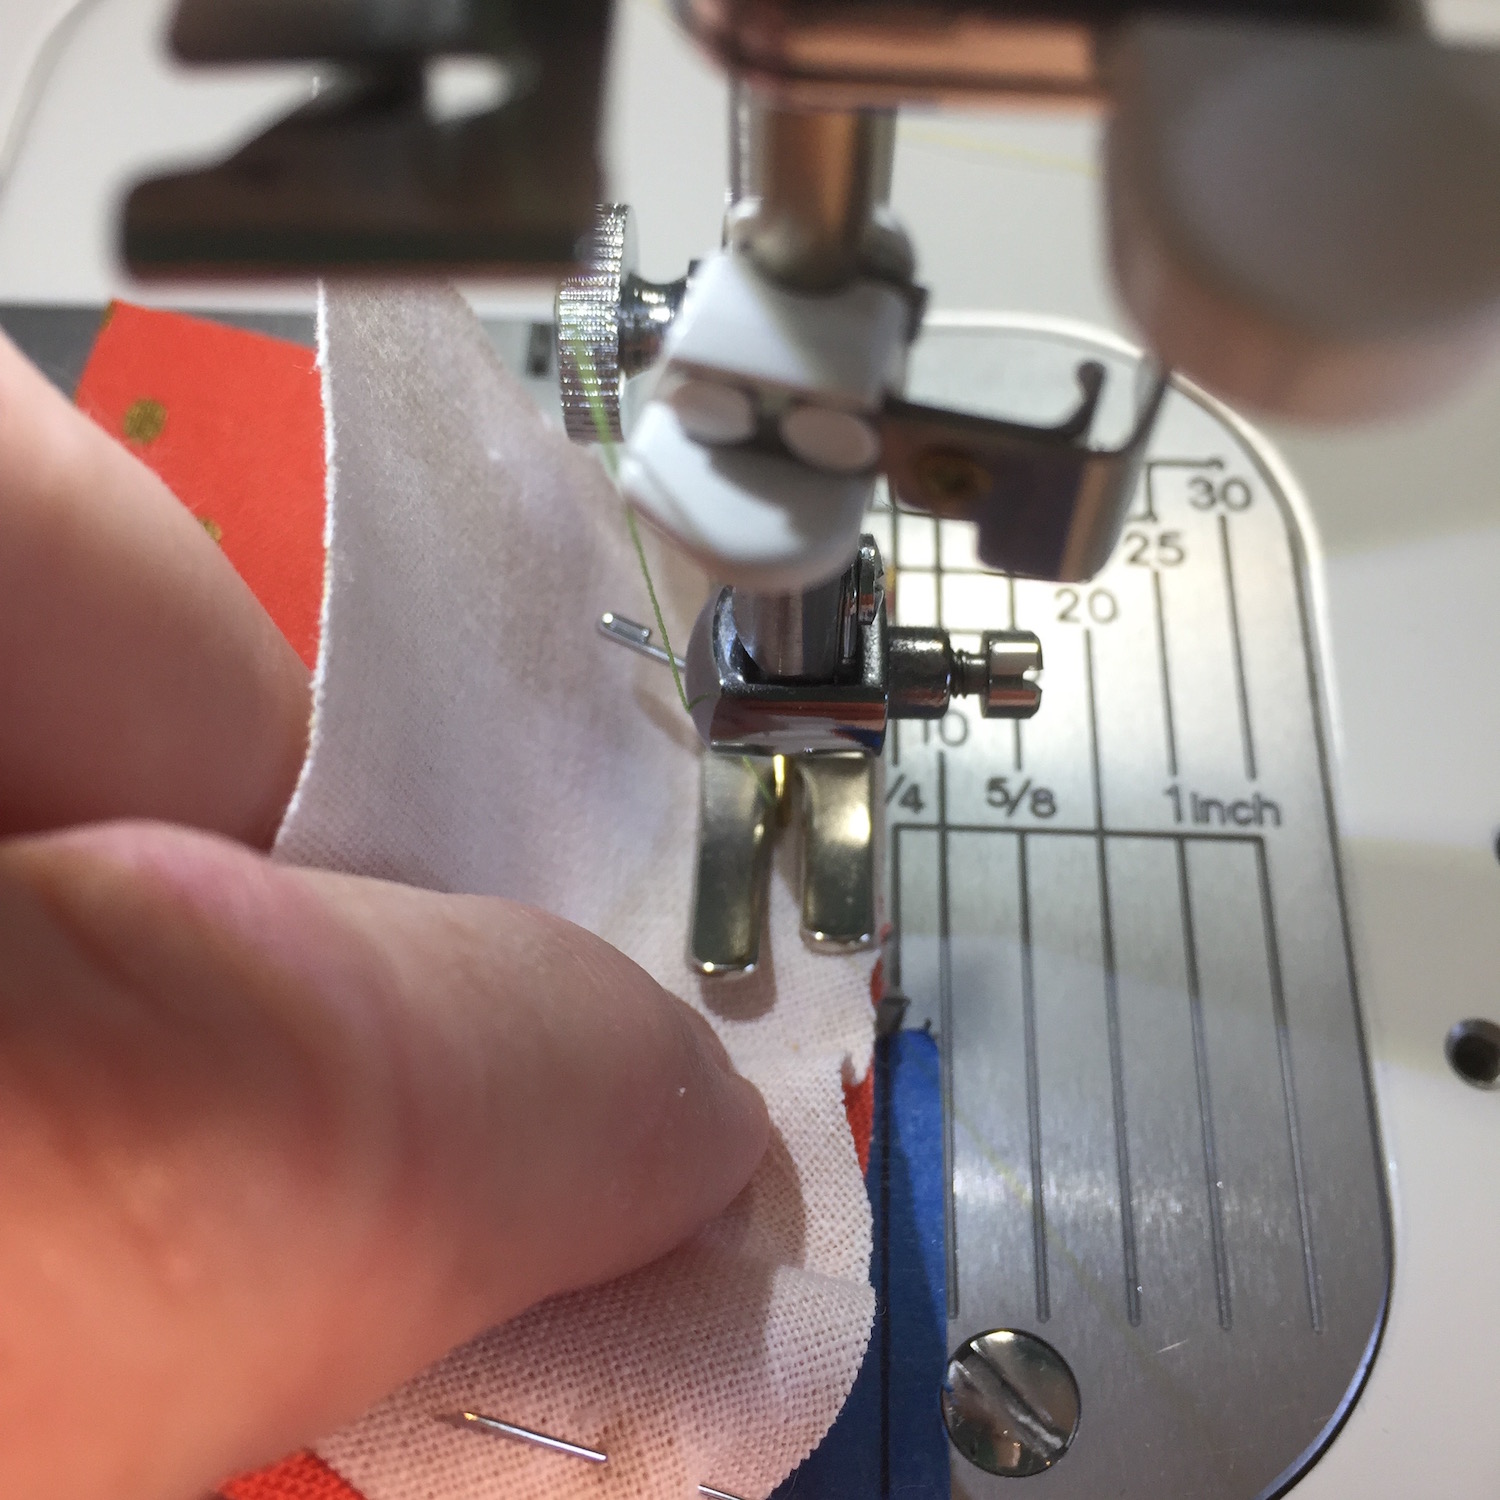 With the needle down you may have to lift the presser foot and adjust the fabric to keep it even and at ¼ inch